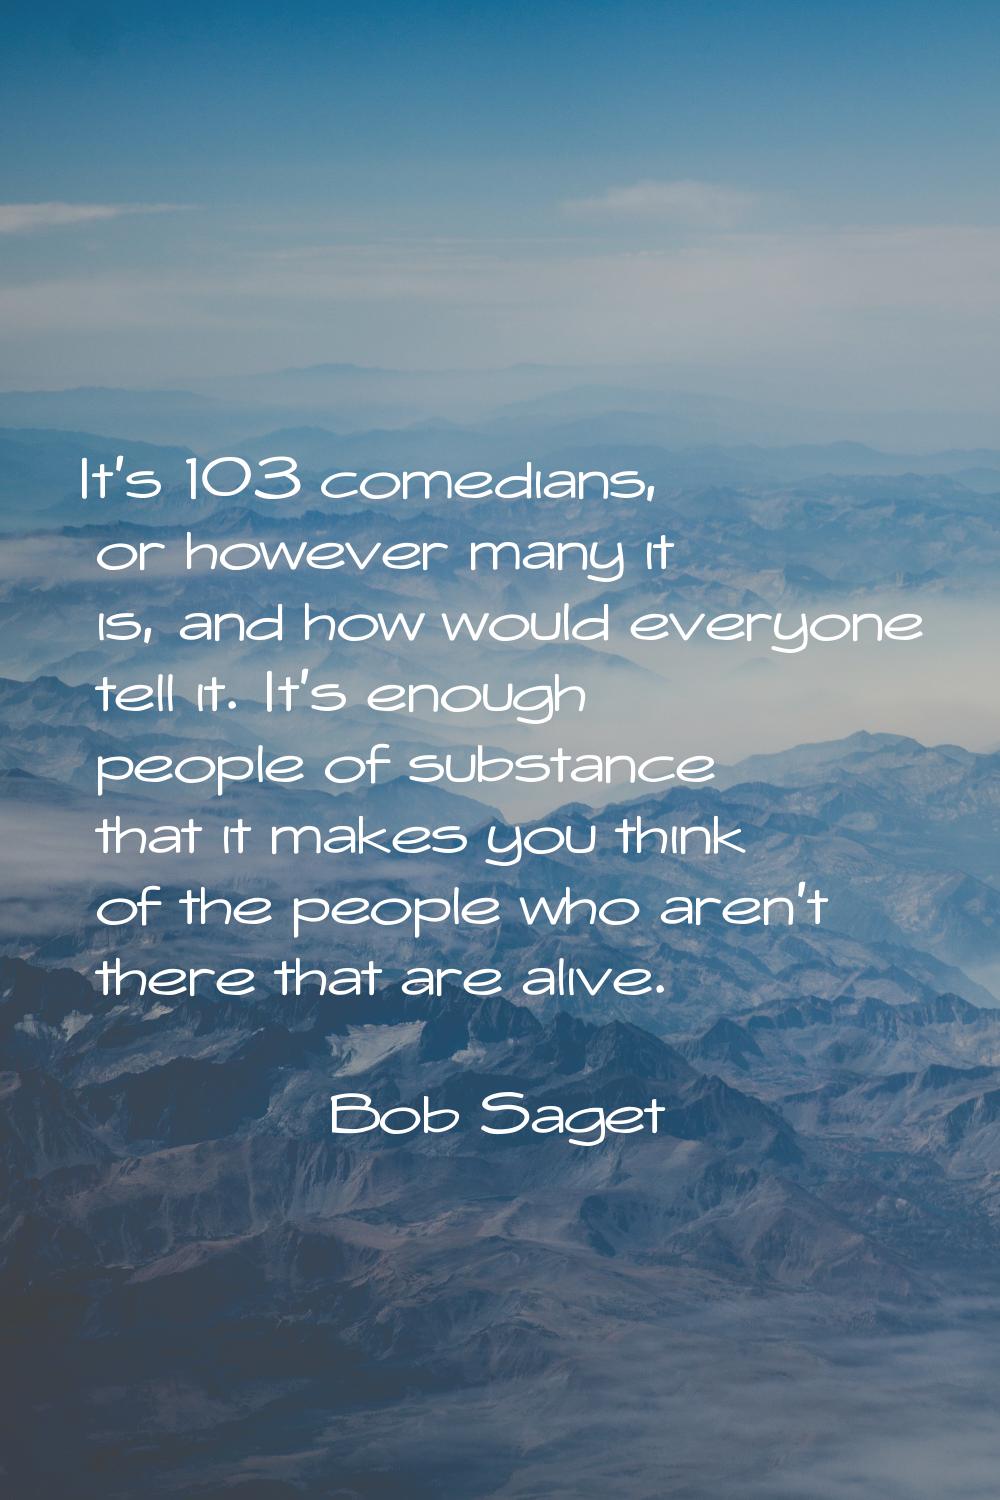 It's 103 comedians, or however many it is, and how would everyone tell it. It's enough people of su